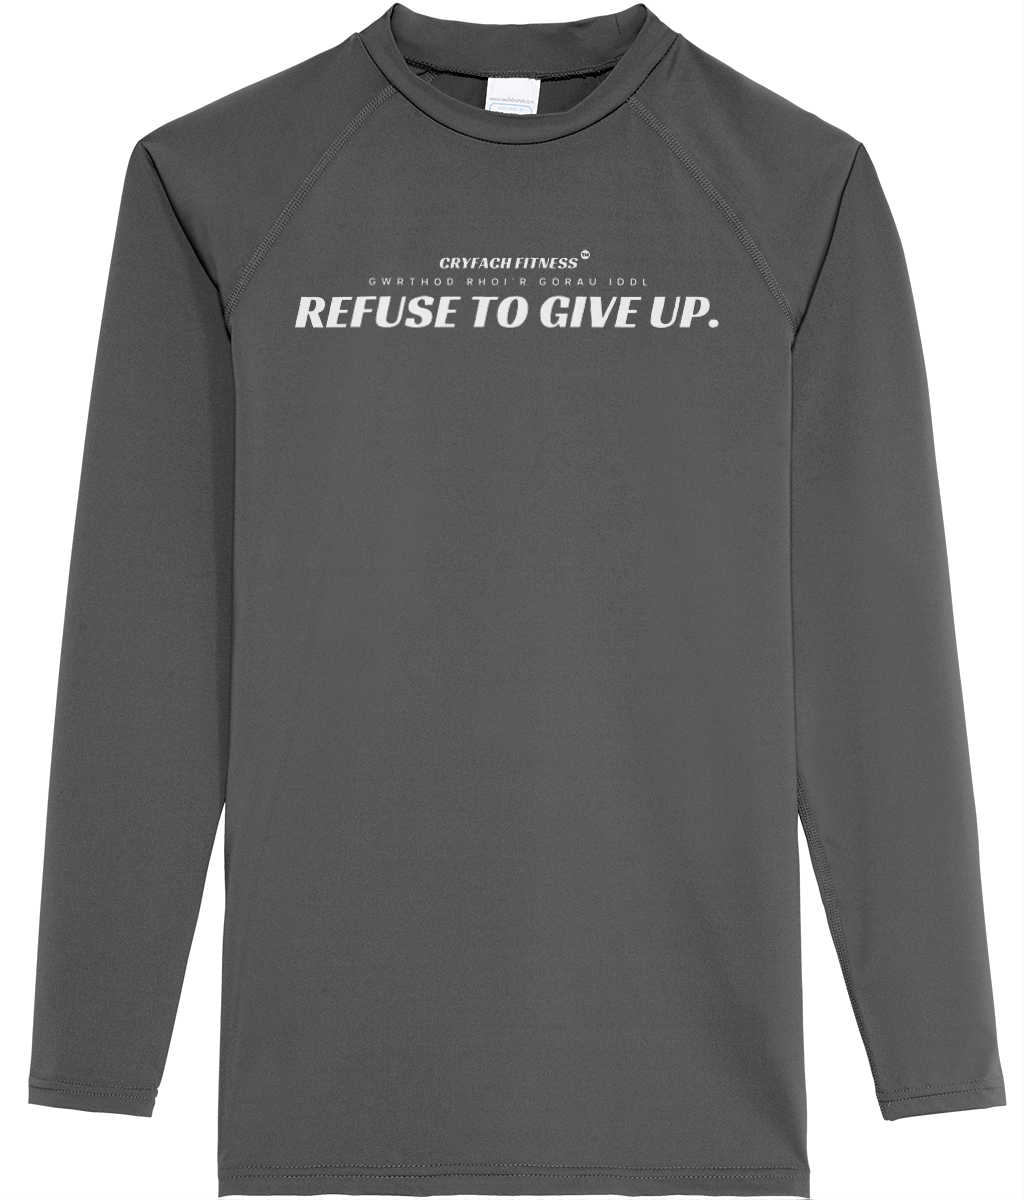 REFUSE TO GIVE UP LONG SLEEVE PERFORMANCE TOP